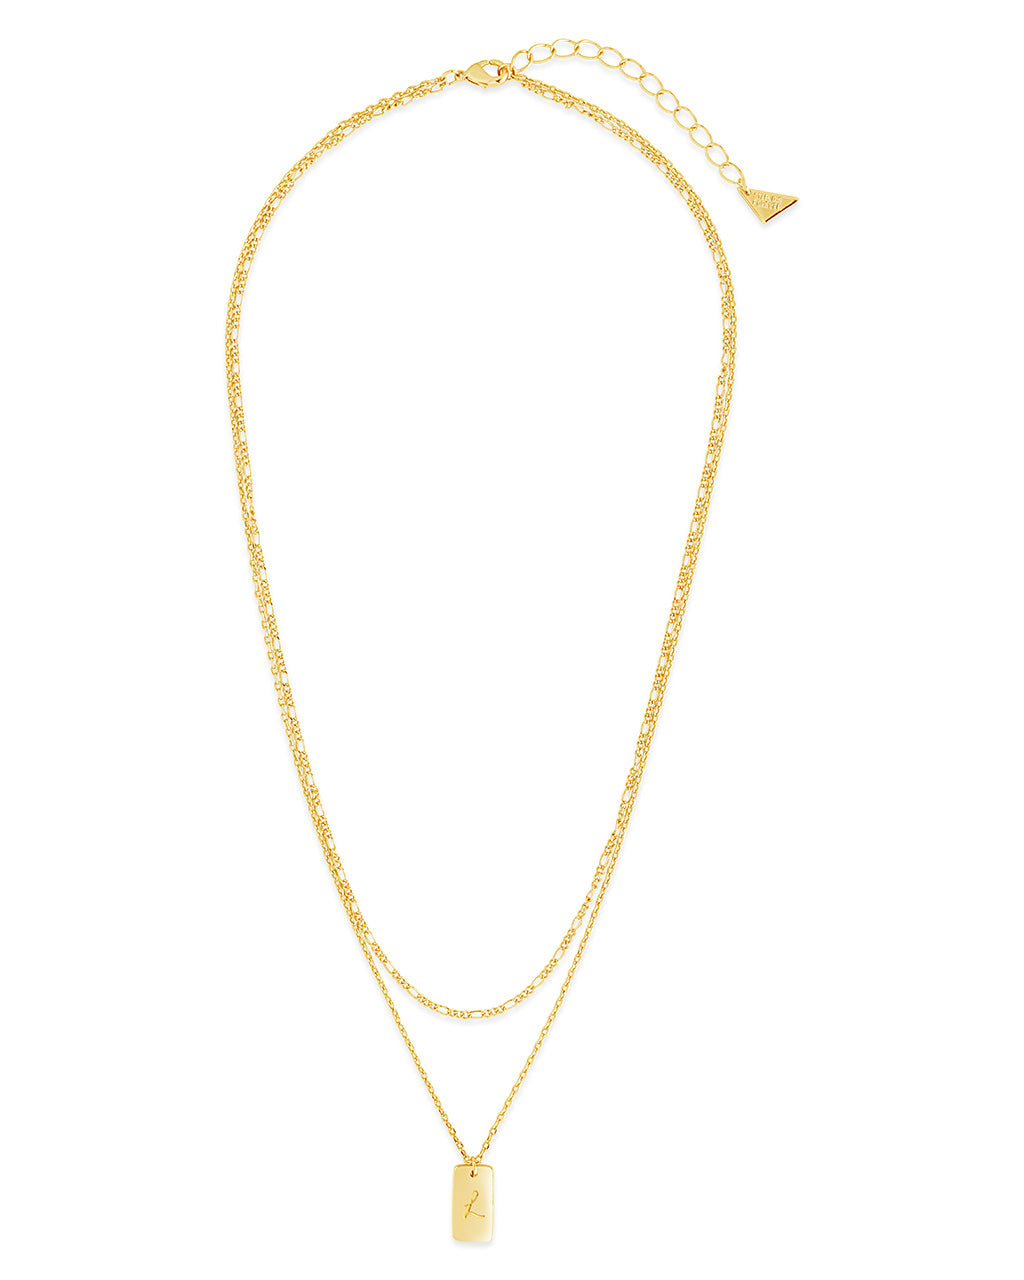 Layered Initial Necklaces for Women - Personalized and Elegant | Baza  Boutique